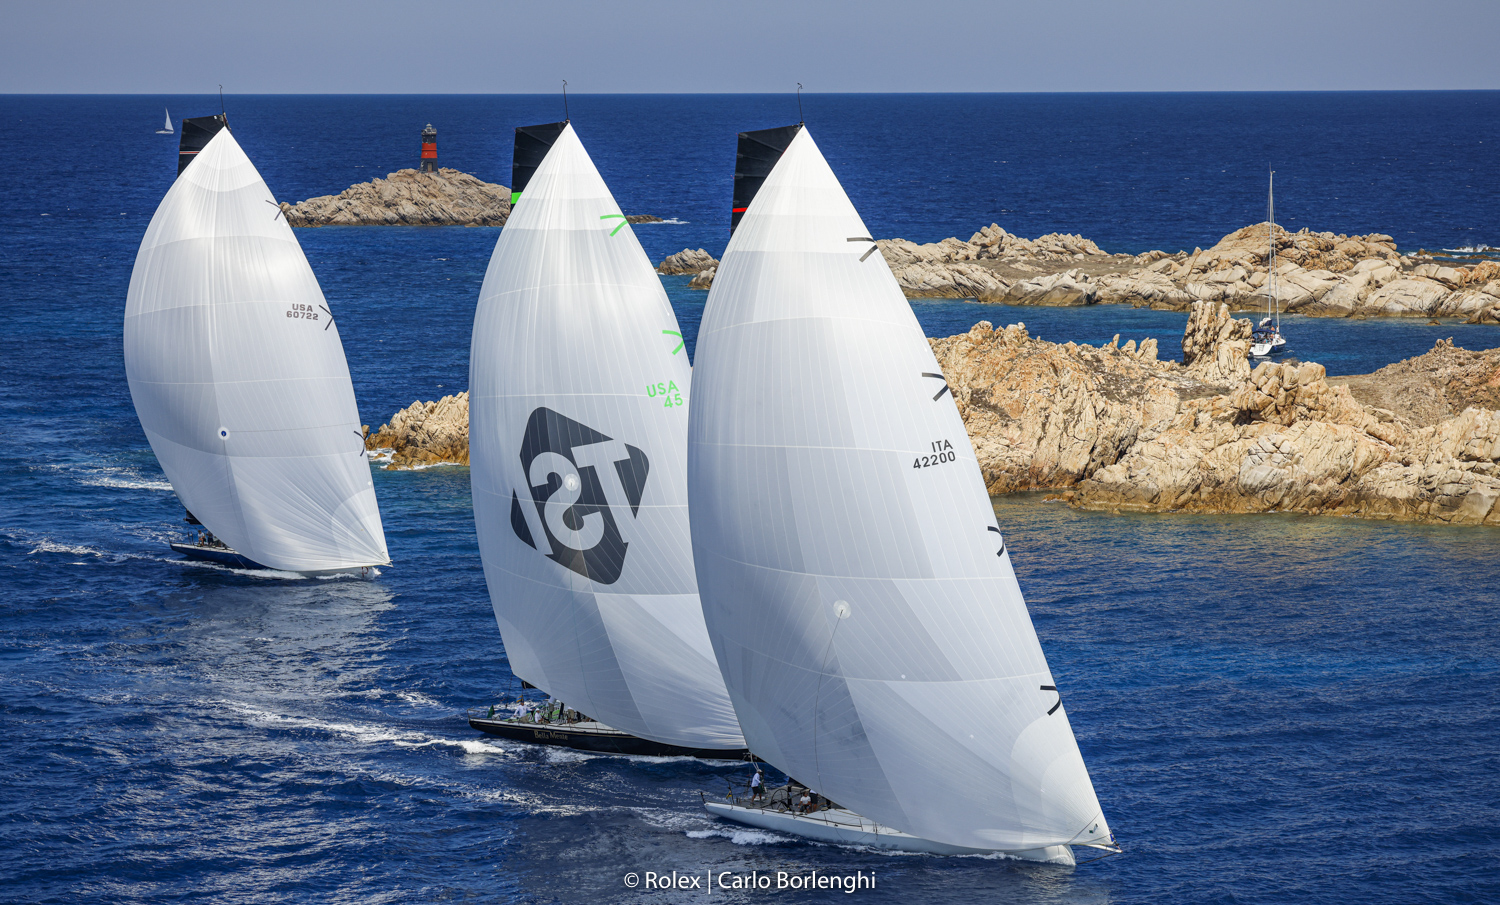 Entries open for the Maxi Yacht Rolex Cup 2022 - NEWS - Yacht Club Costa Smeralda